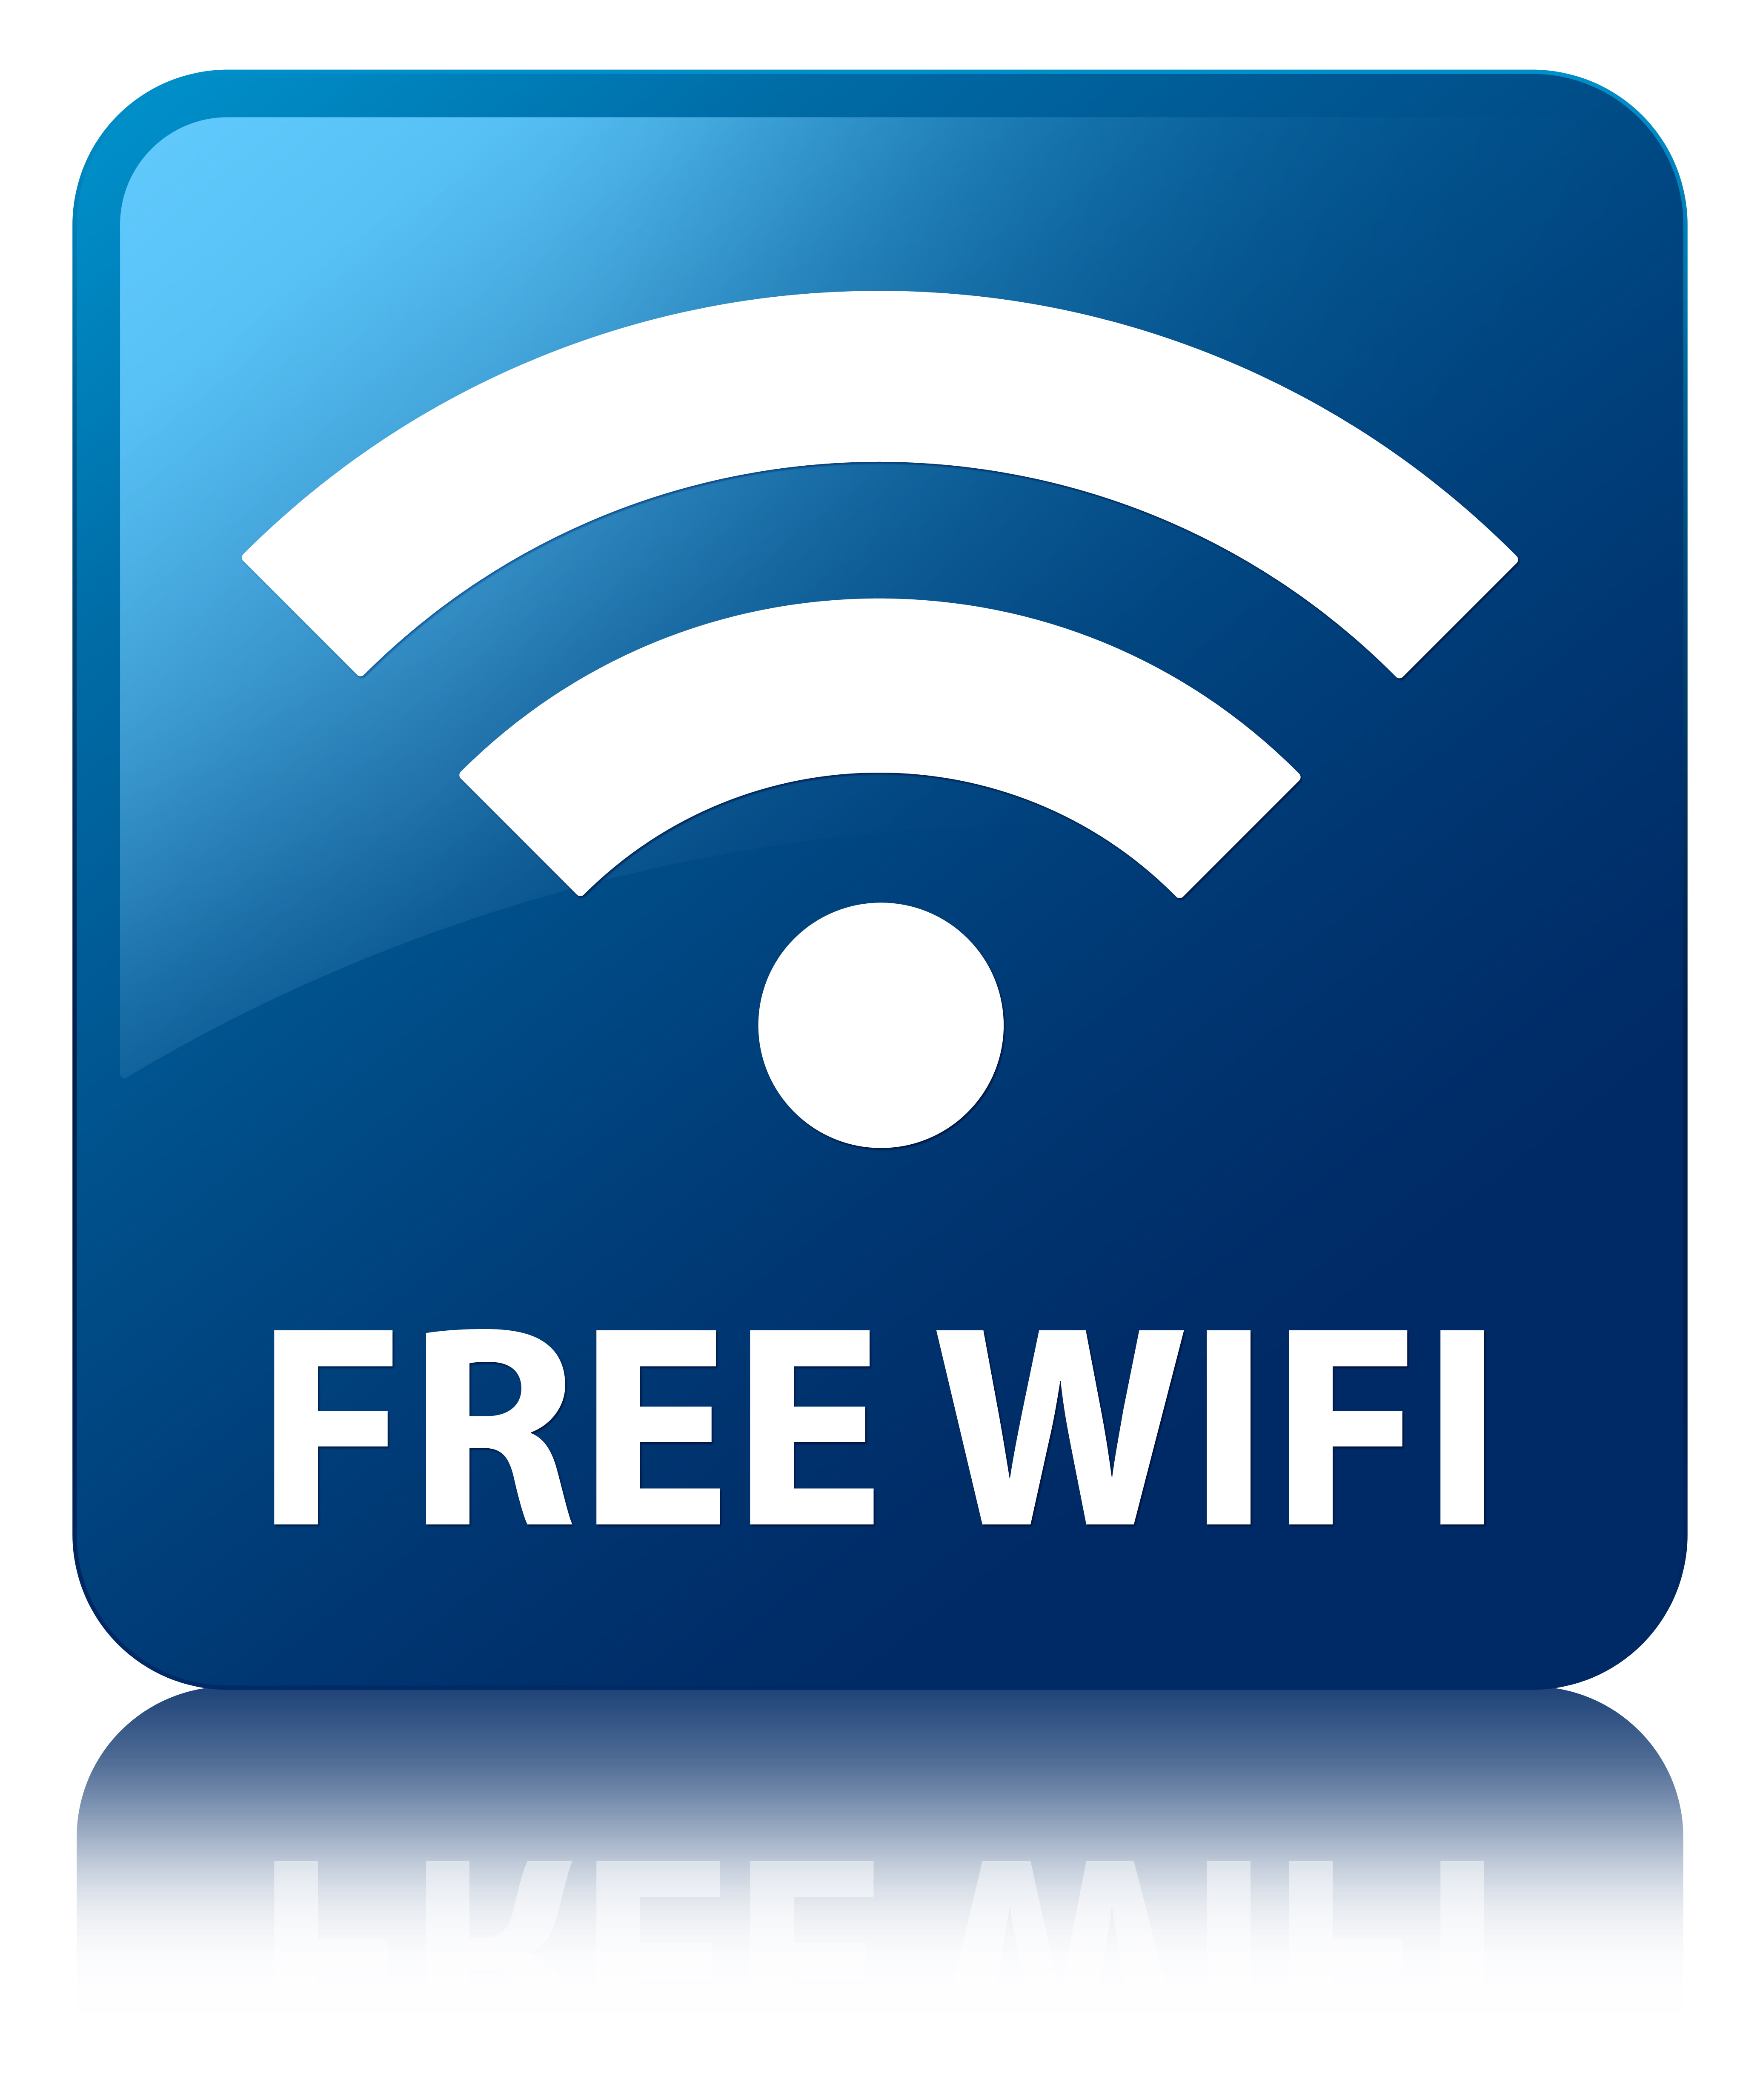 WiFi access at hotels - is it all about the money? -